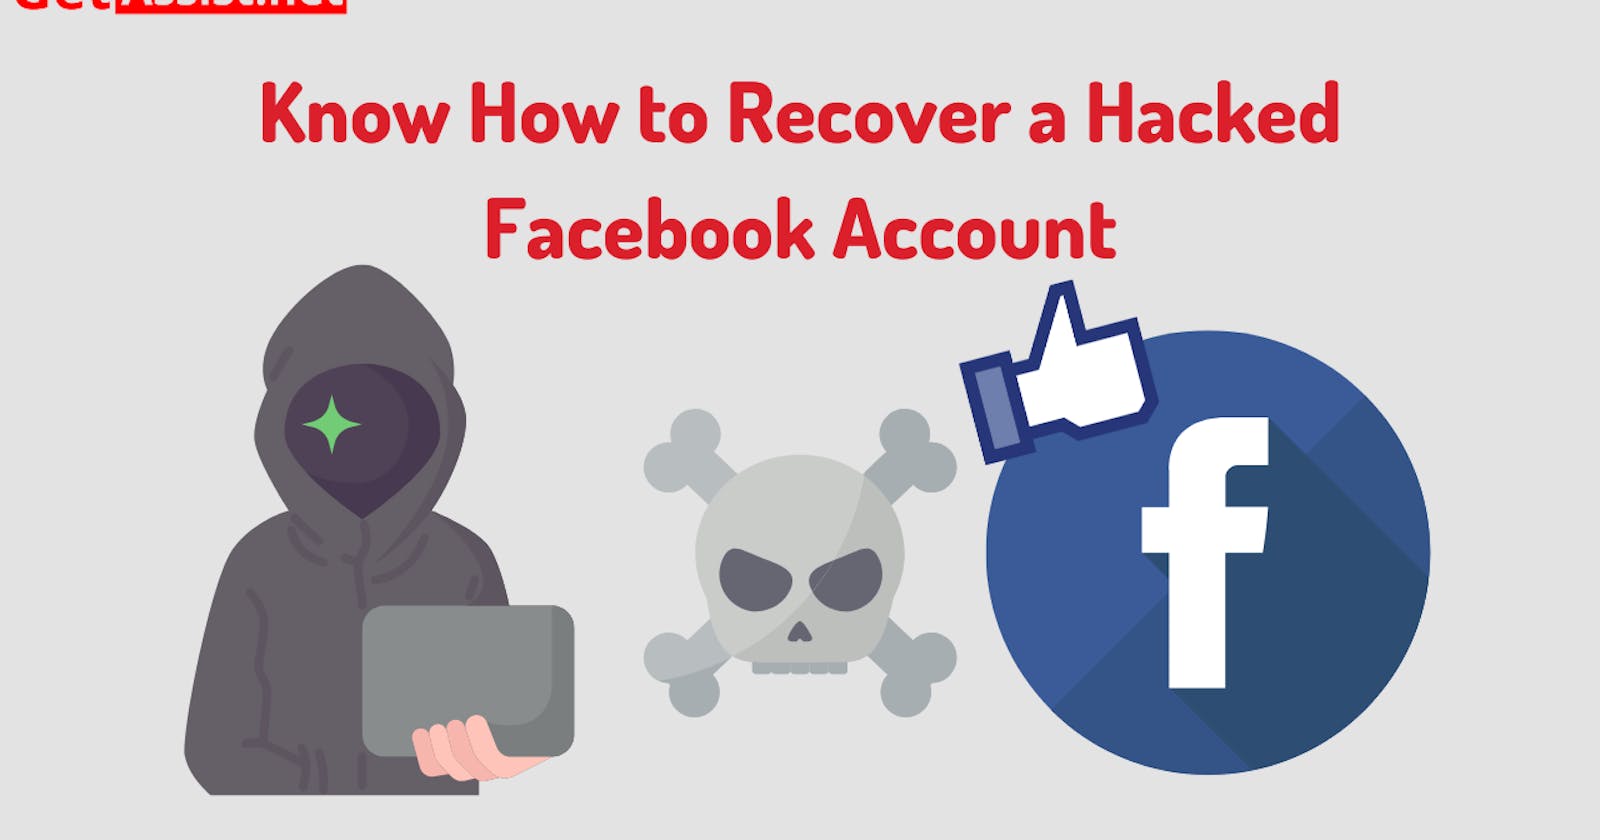 Know-How to Recover a Hacked Facebook Account